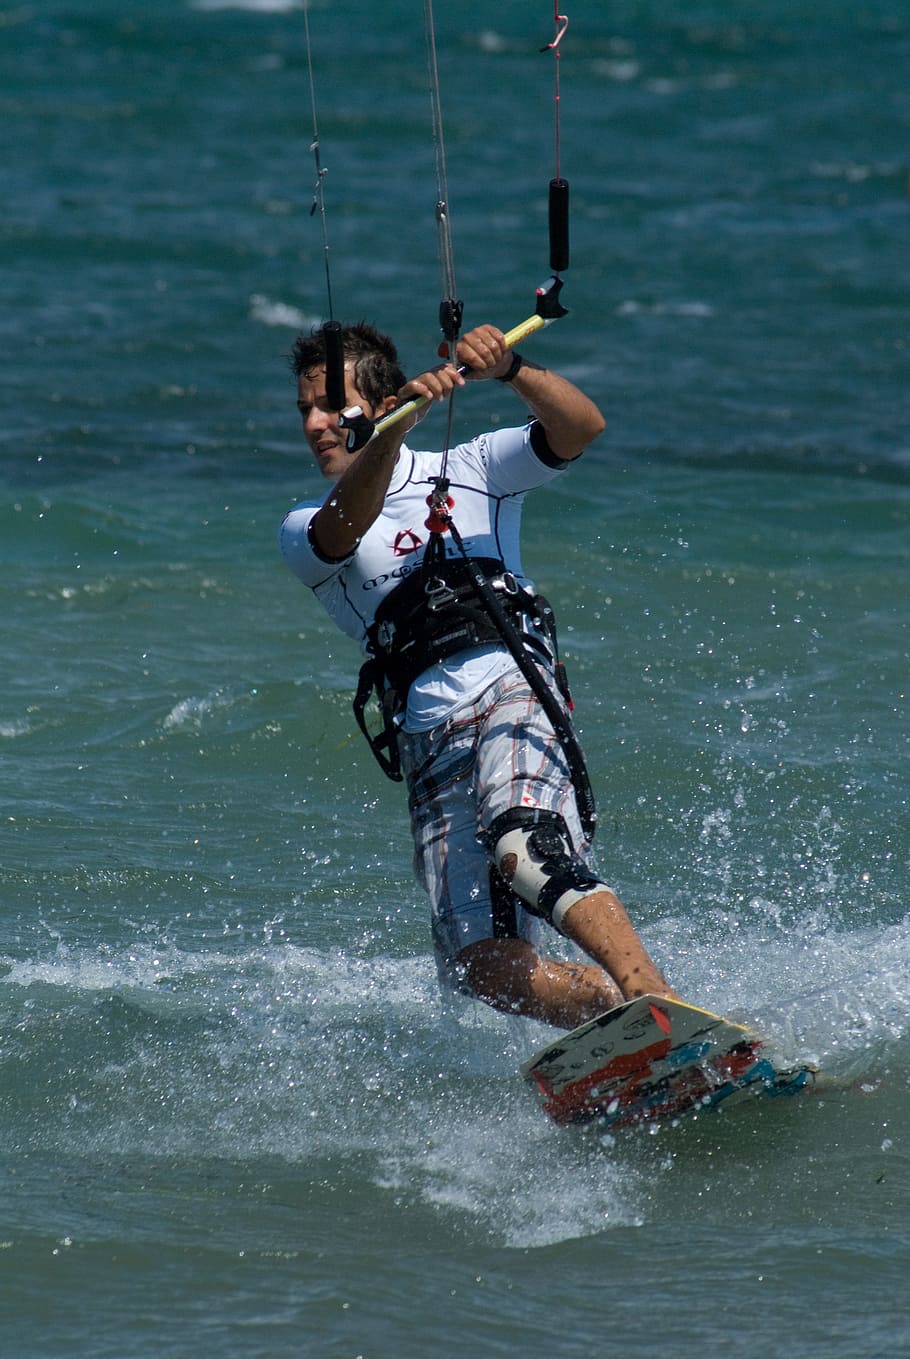 kitesurf, water sports, lake, water, one person, real people, sea, sport, lifestyles, leisure activity